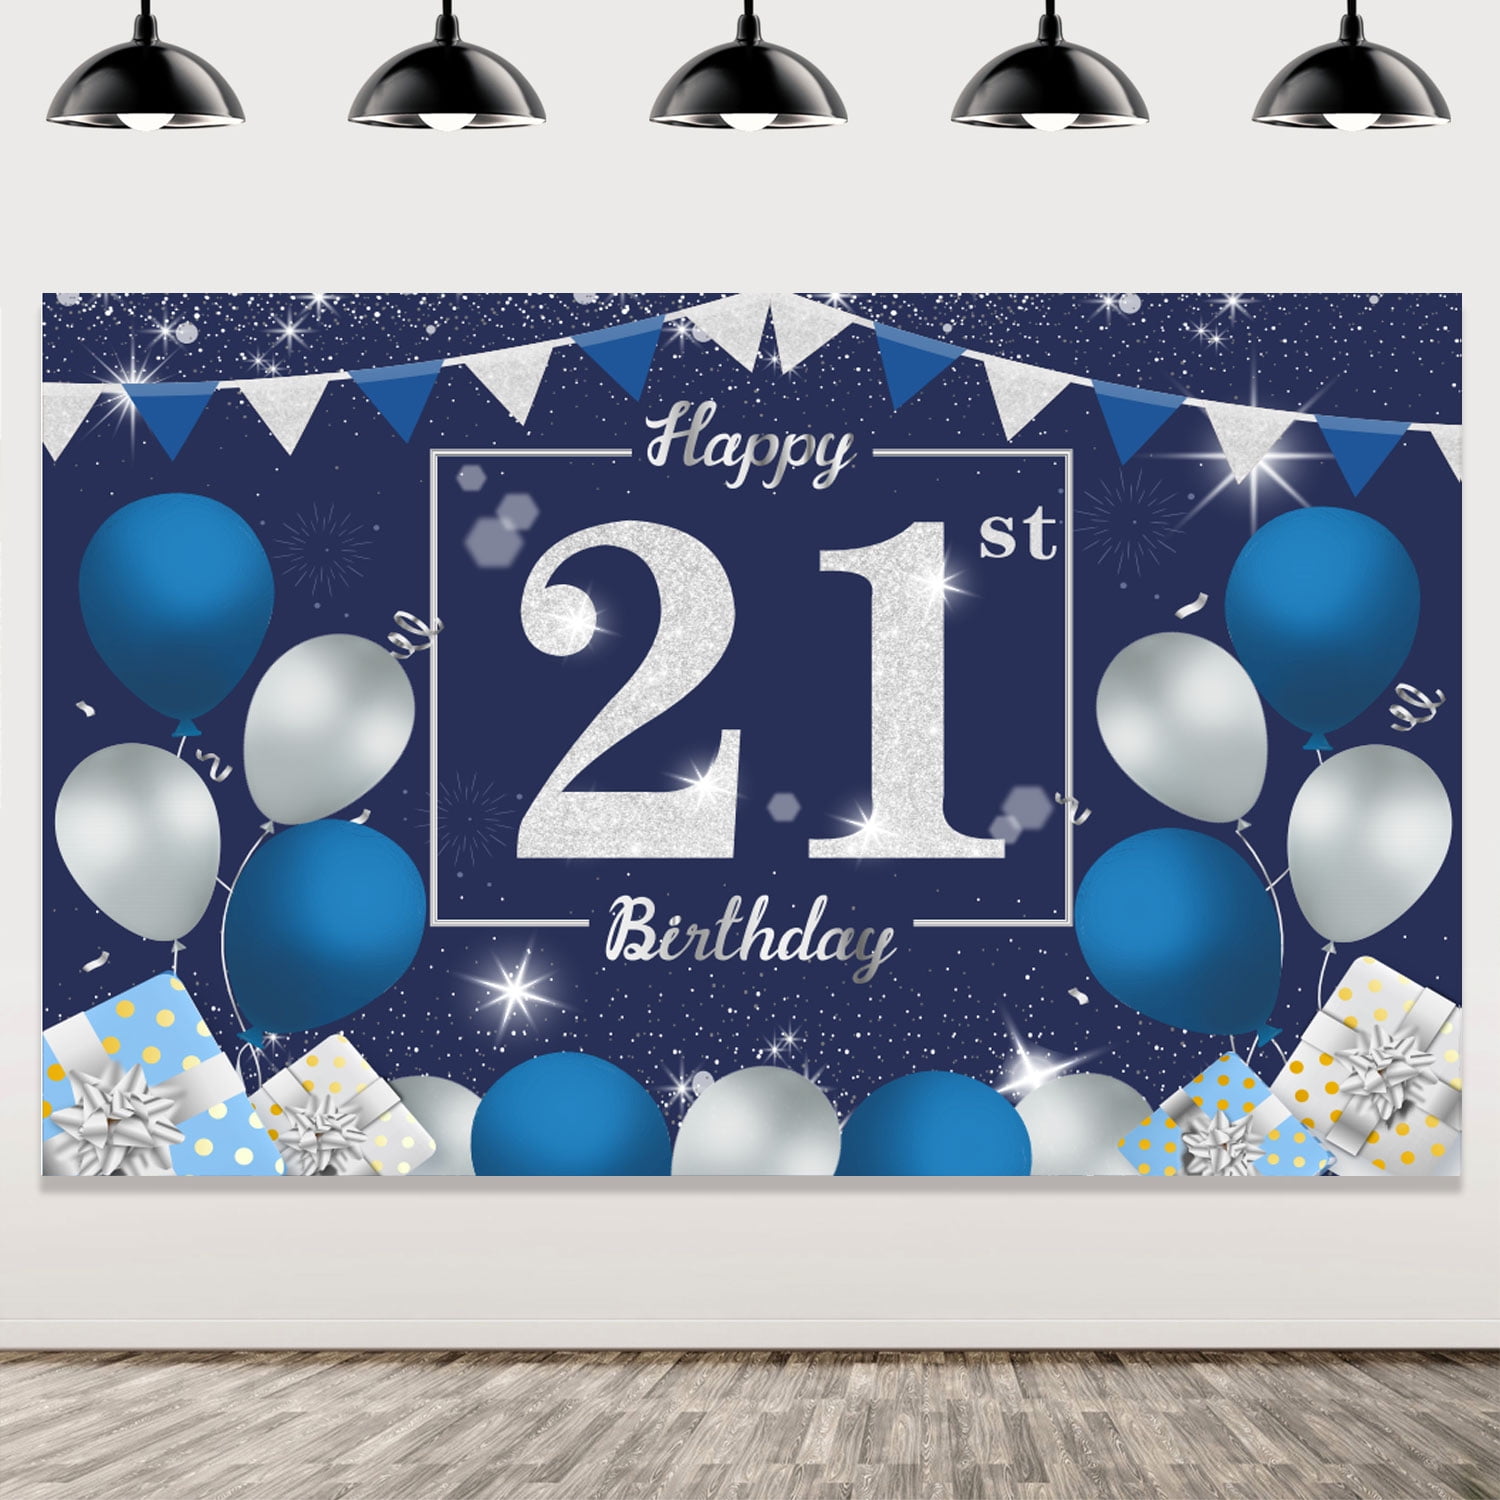 Happy 21st Birthday Banner Decorations for Boy Men, Blue Silver 21 Birthday Backdrop Party Supplies, 21 Year Old Birthday Photo Background Sign Decor, 21st Birthday Banner Backdrop - Walmart.com